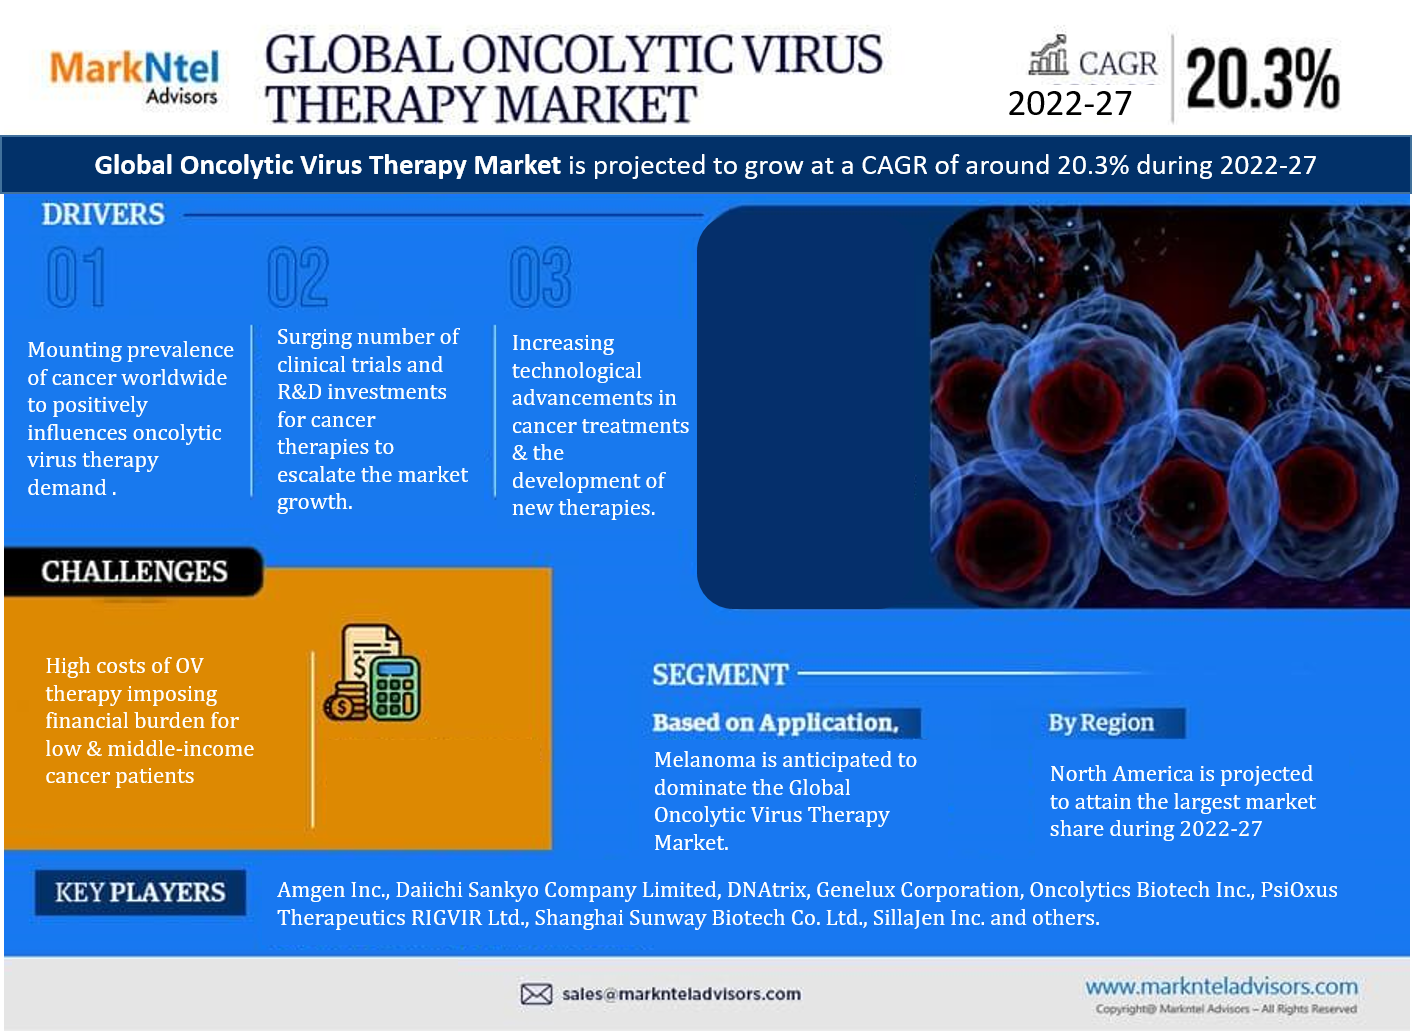 Oncolytic Virus Therapy Market Analysis: Assessing Industry Dynamics and Growth Opportunities